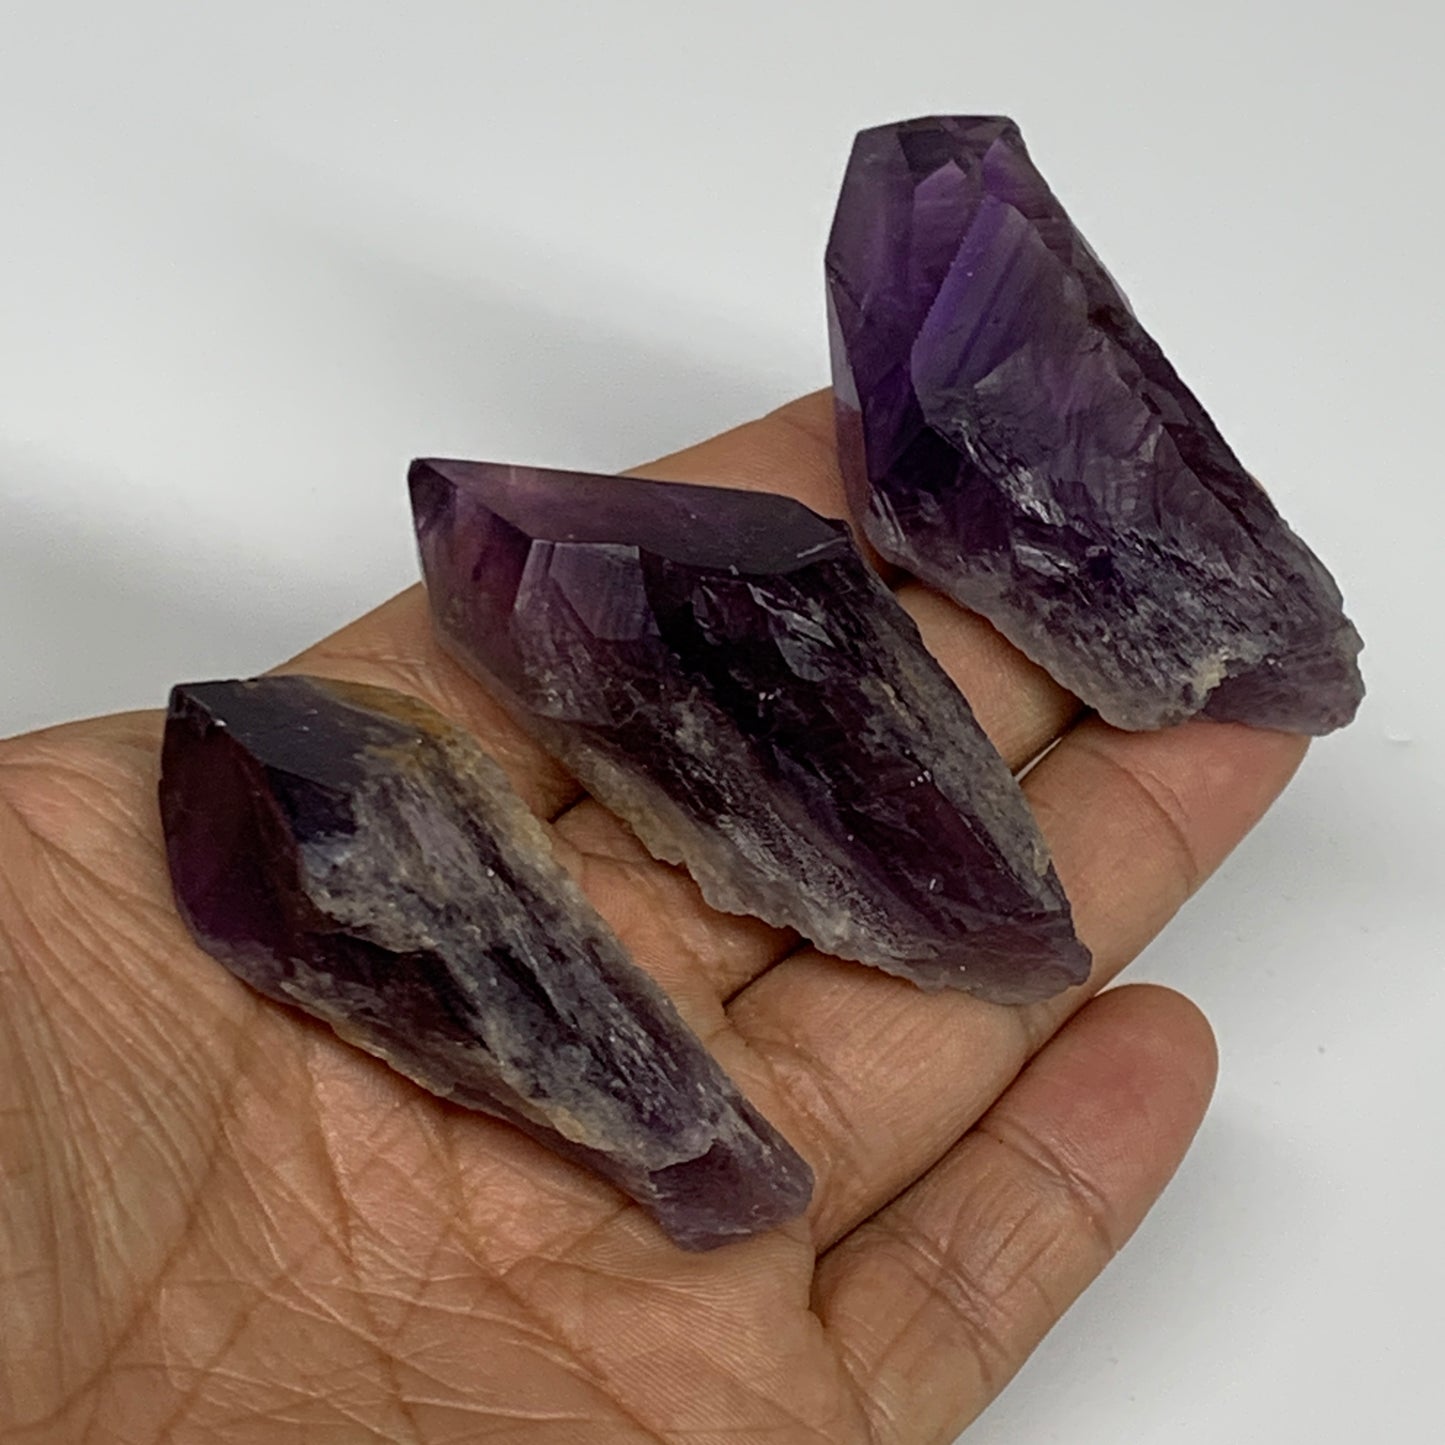 98.4g, 2.2" - 2.4", 3pcs, Amethyst Point Polished Rough lower part, B32392